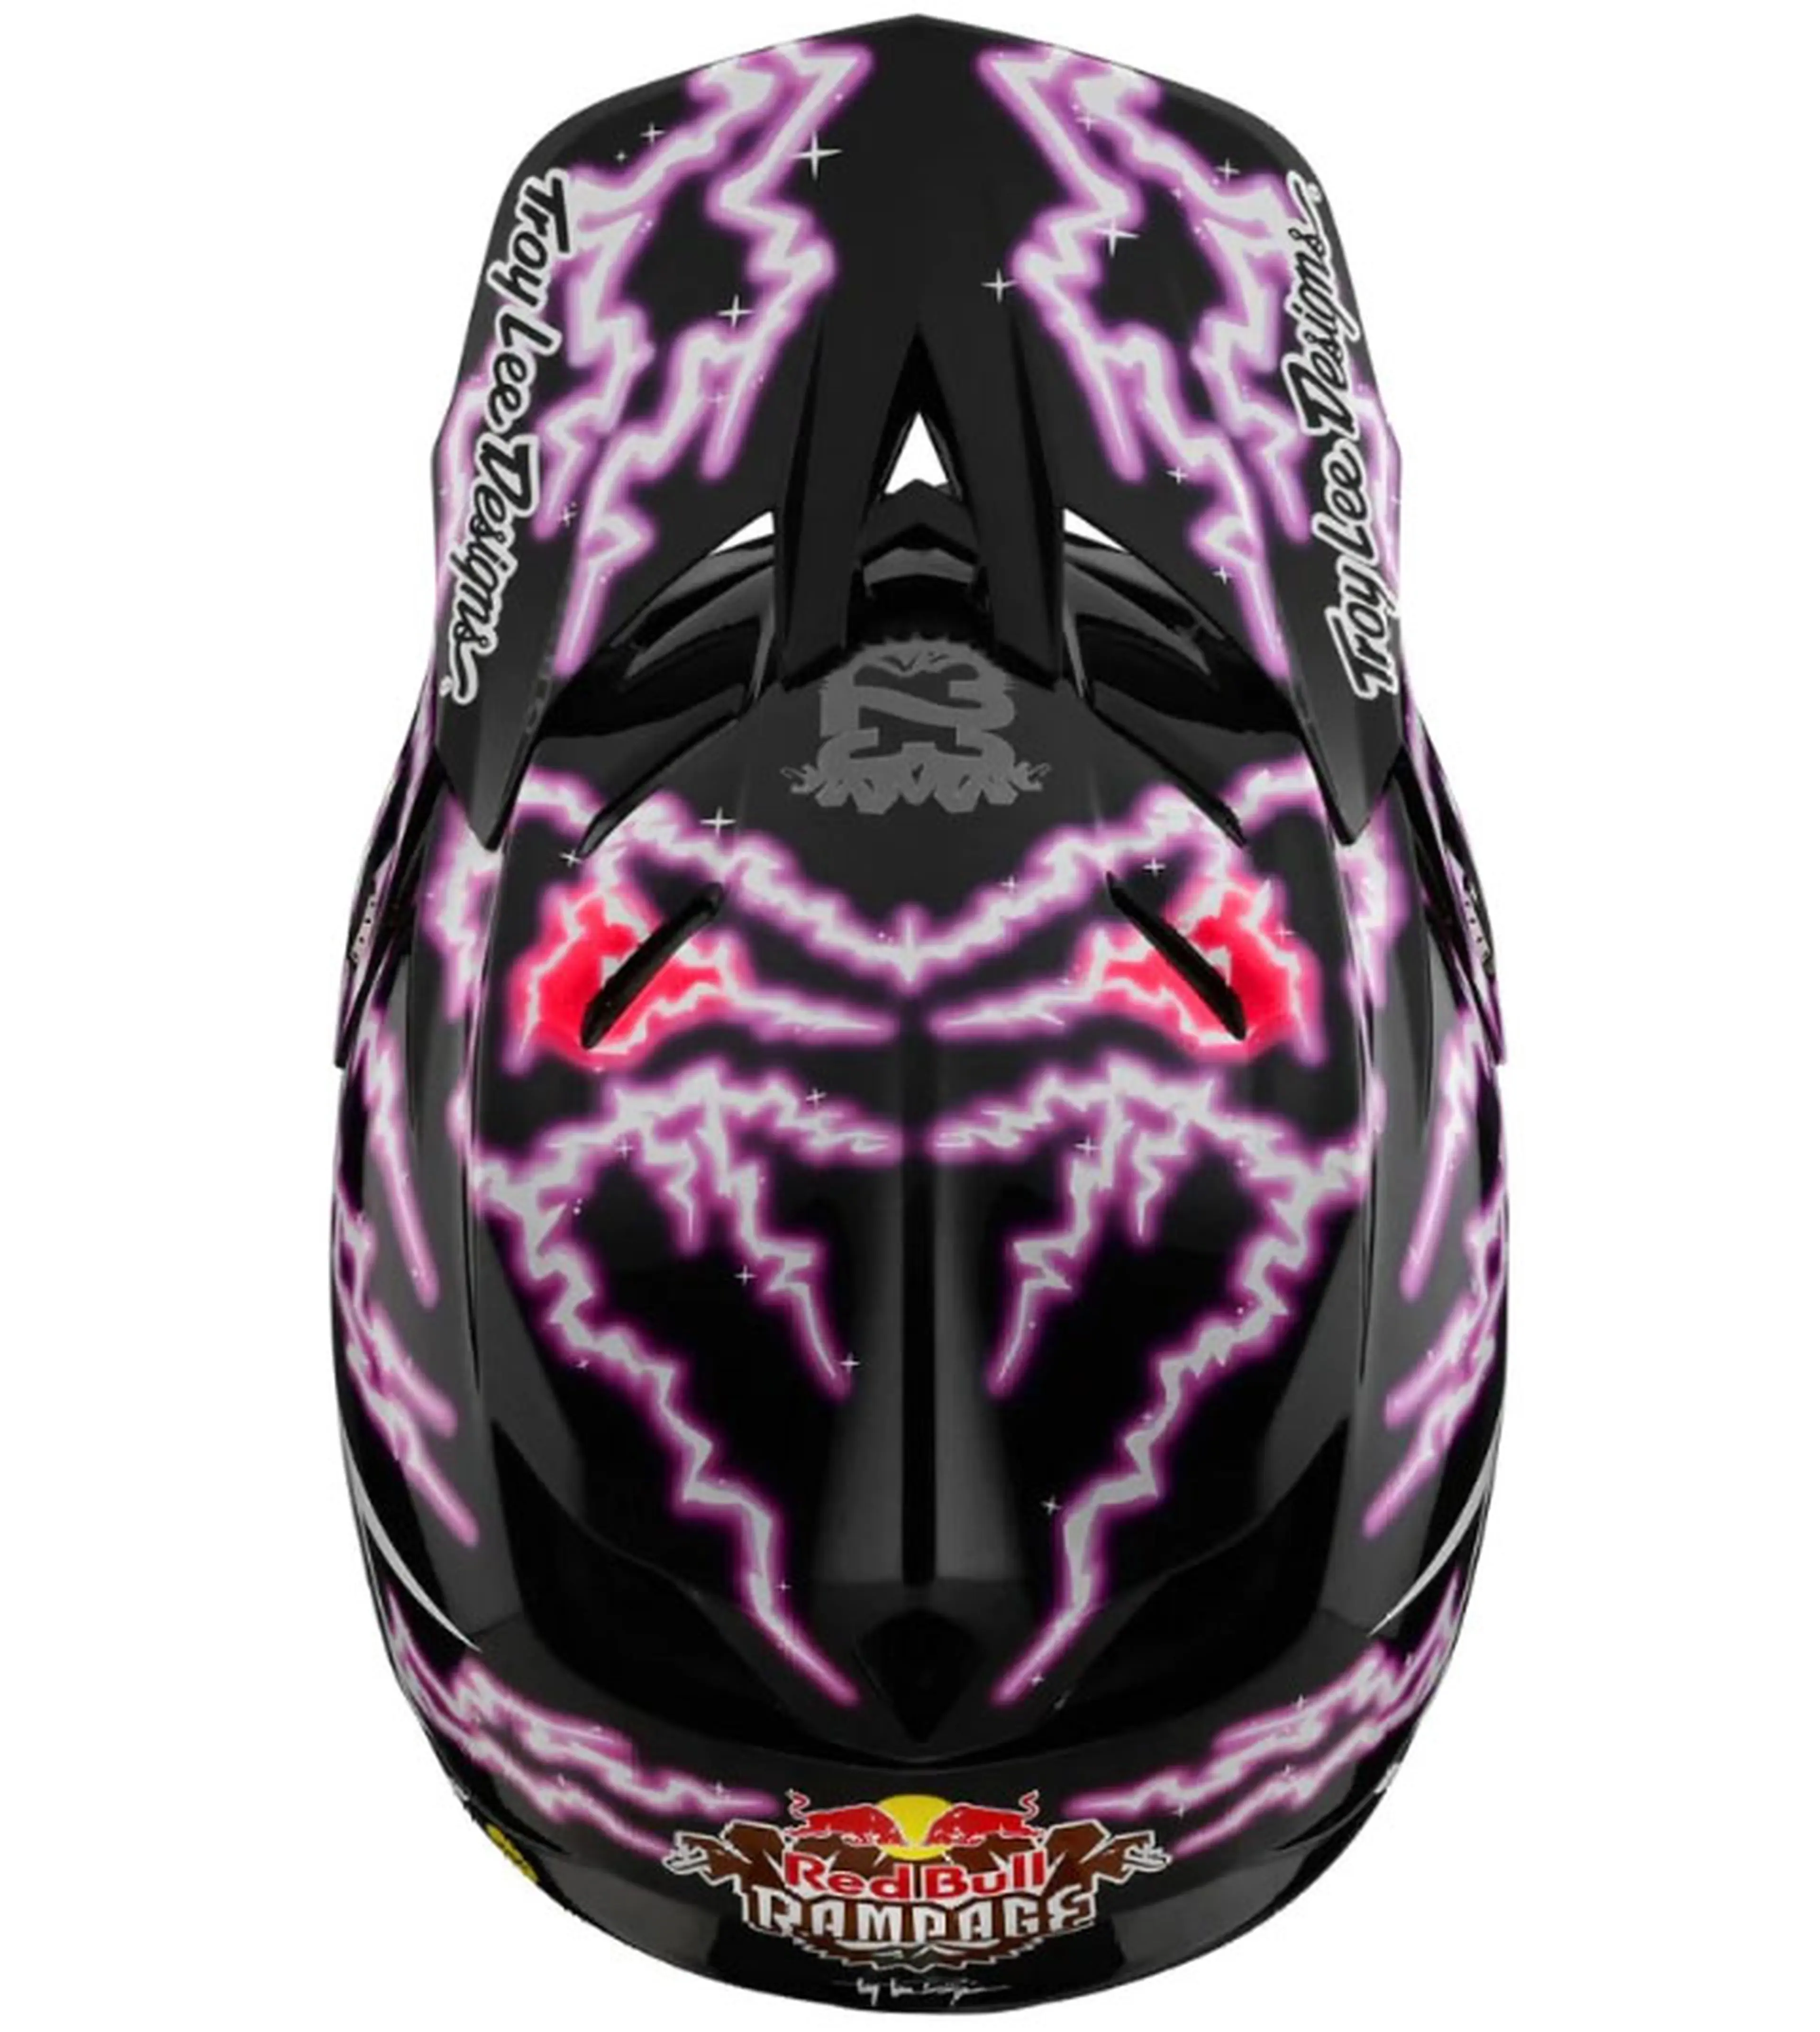 6. Troy Lee Designs X Red Bull Rampage D4 Composite Fullface XL(60-61cm)